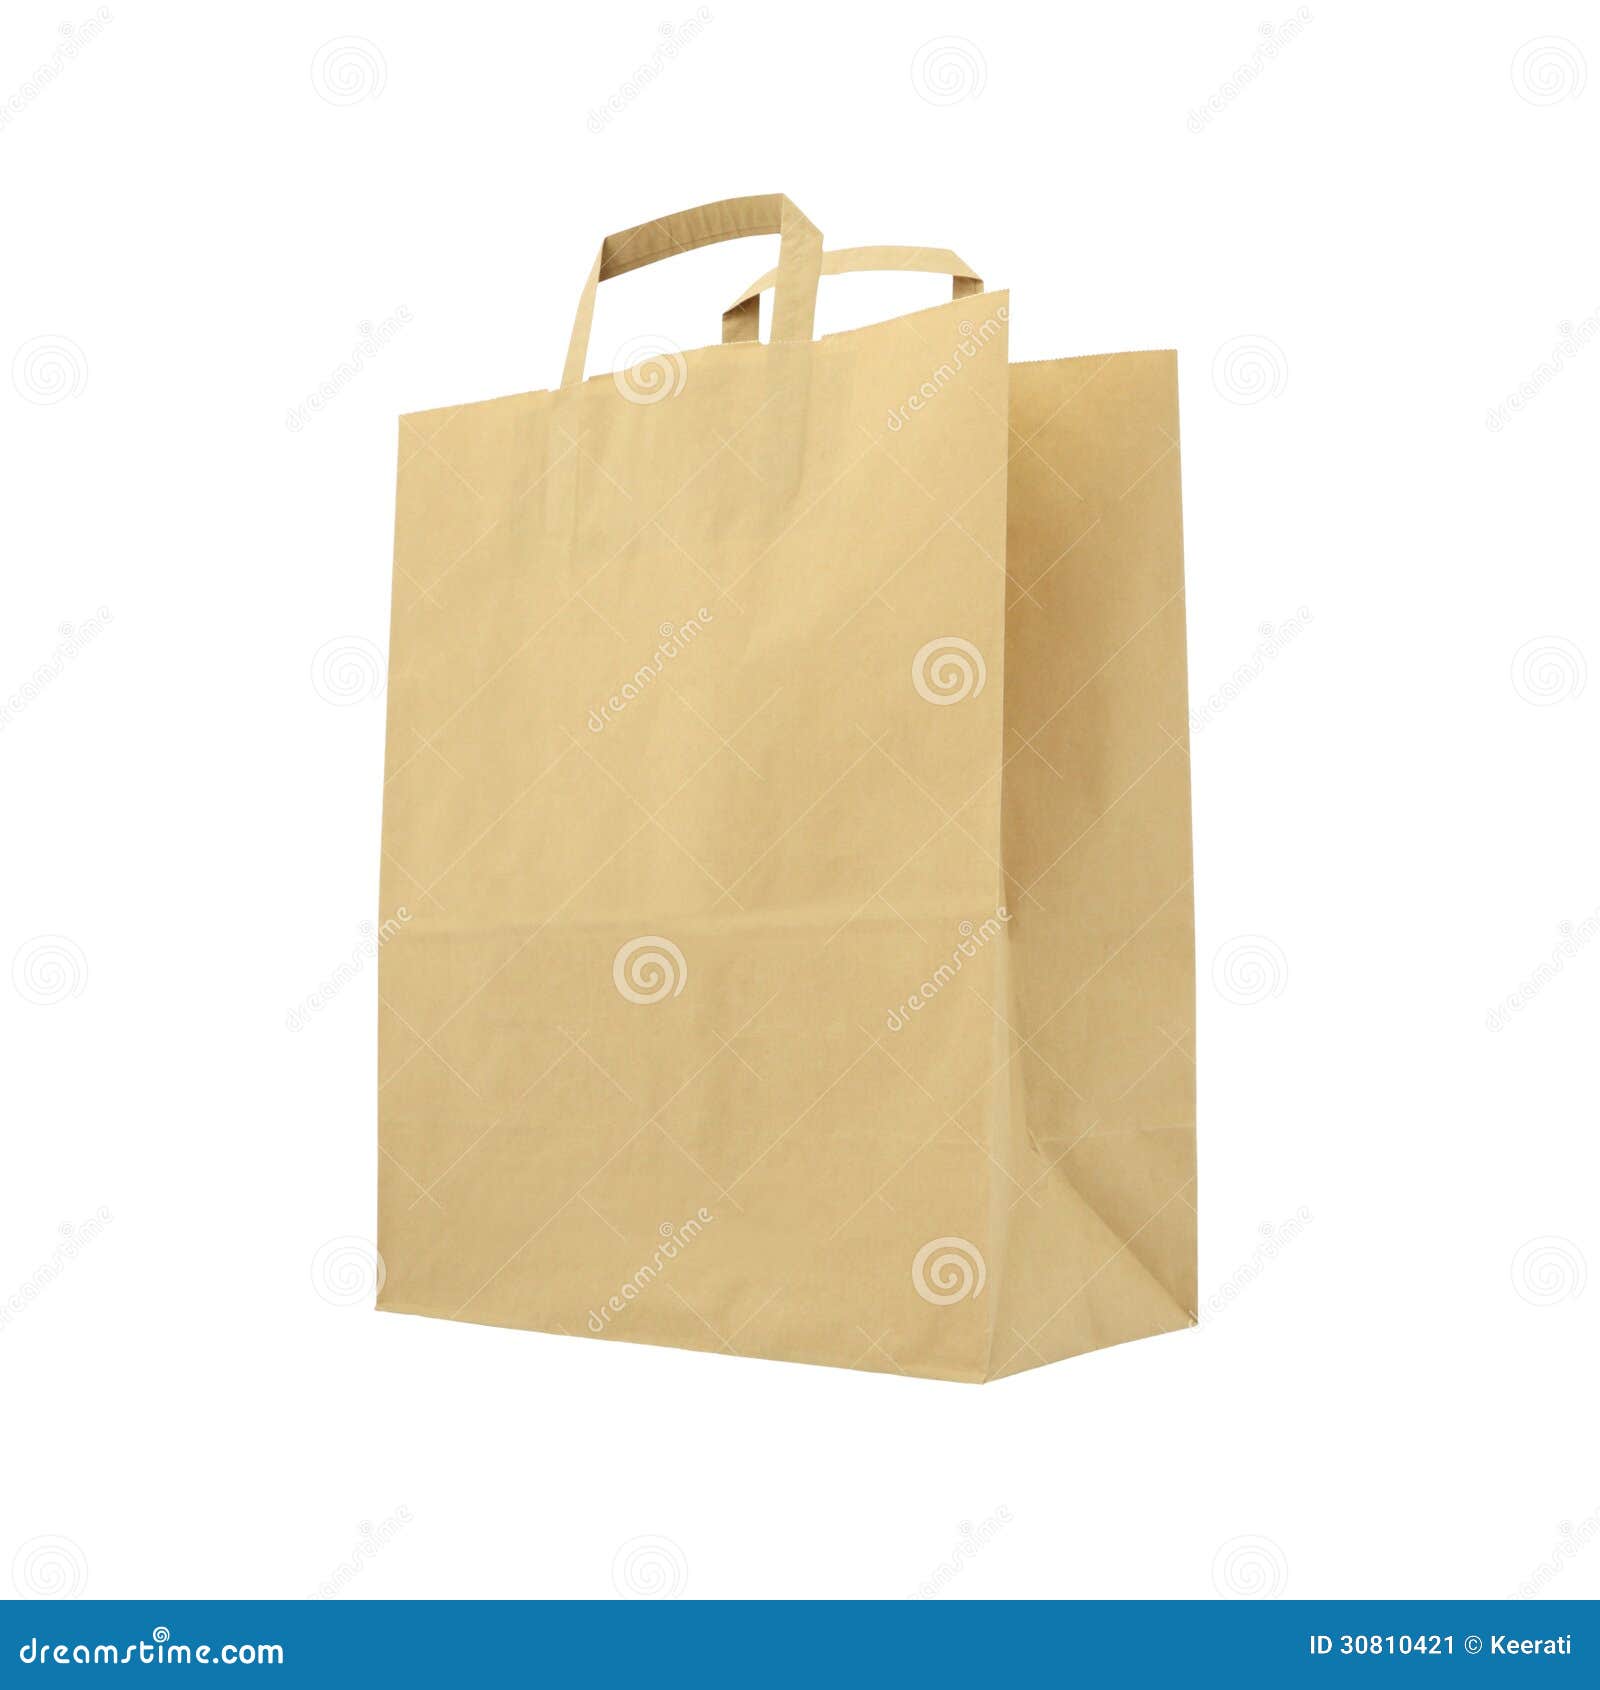 Side paper brown bag stock image. Image of sell, paper - 30810421